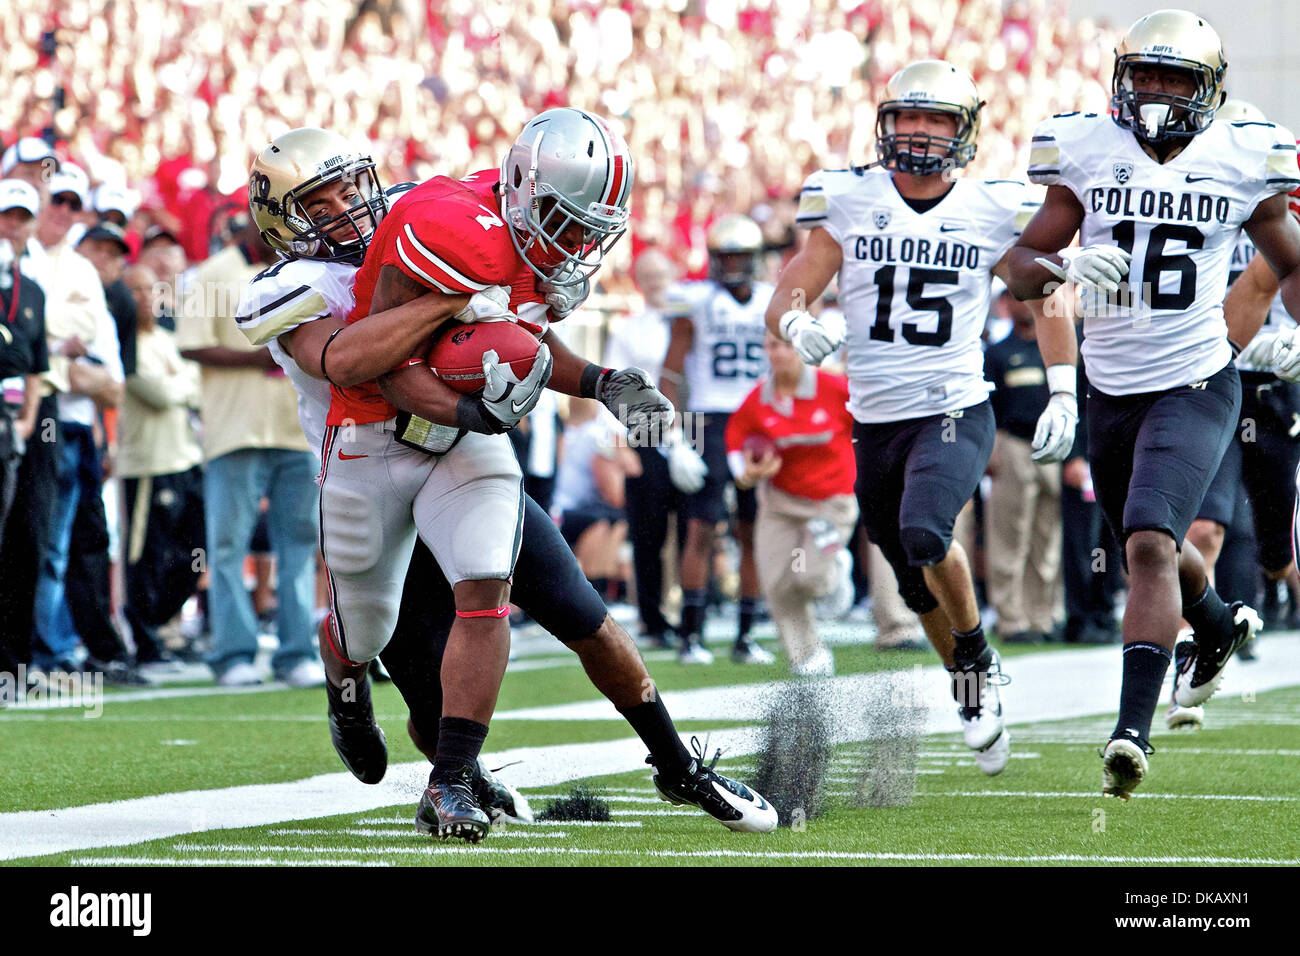 Sept. 24, 2011 - Columbus, Ohio, U.S - Ohio State Buckeyes running back Jordan Hall (7) is brought down by Colorado Buffaloes defensive back Terrel Smith (41) after a 90 yard punt return in the third quarter of the game between Colorado and Ohio State at Ohio Stadium, Columbus, Ohio. Ohio State defeated Colorado 37-17. (Credit Image: © Scott Stuart/Southcreek Global/ZUMAPRESS.com) Stock Photo